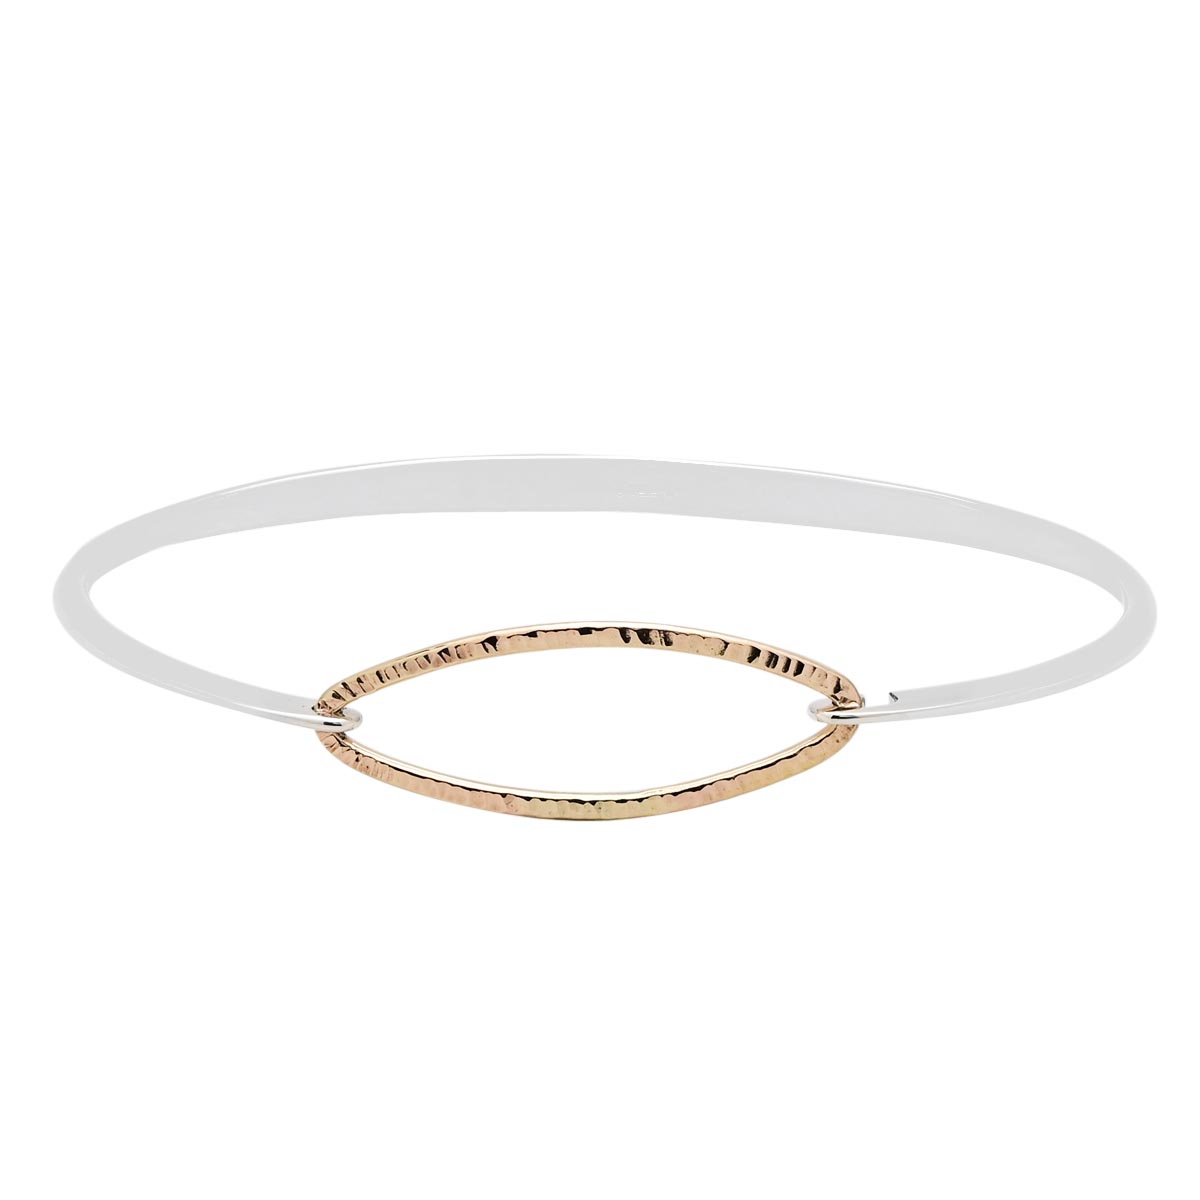 E.L. Designs Textured Oval Bracelet in Sterling Silver and 14kt Yellow Gold